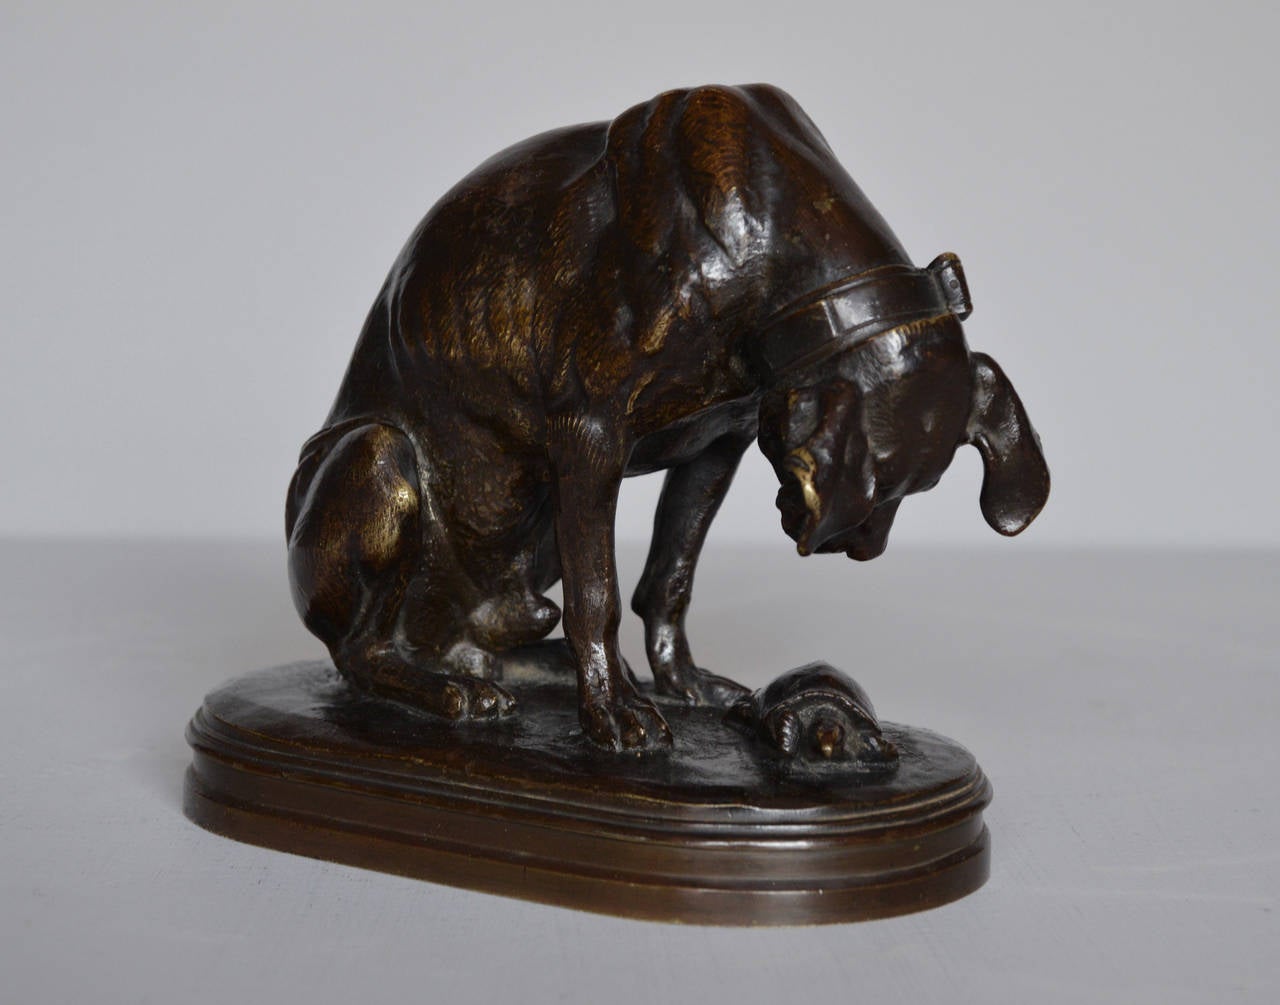 Hound and Tortoise - Sculpture by Henri Alfred Marie Jacquemart